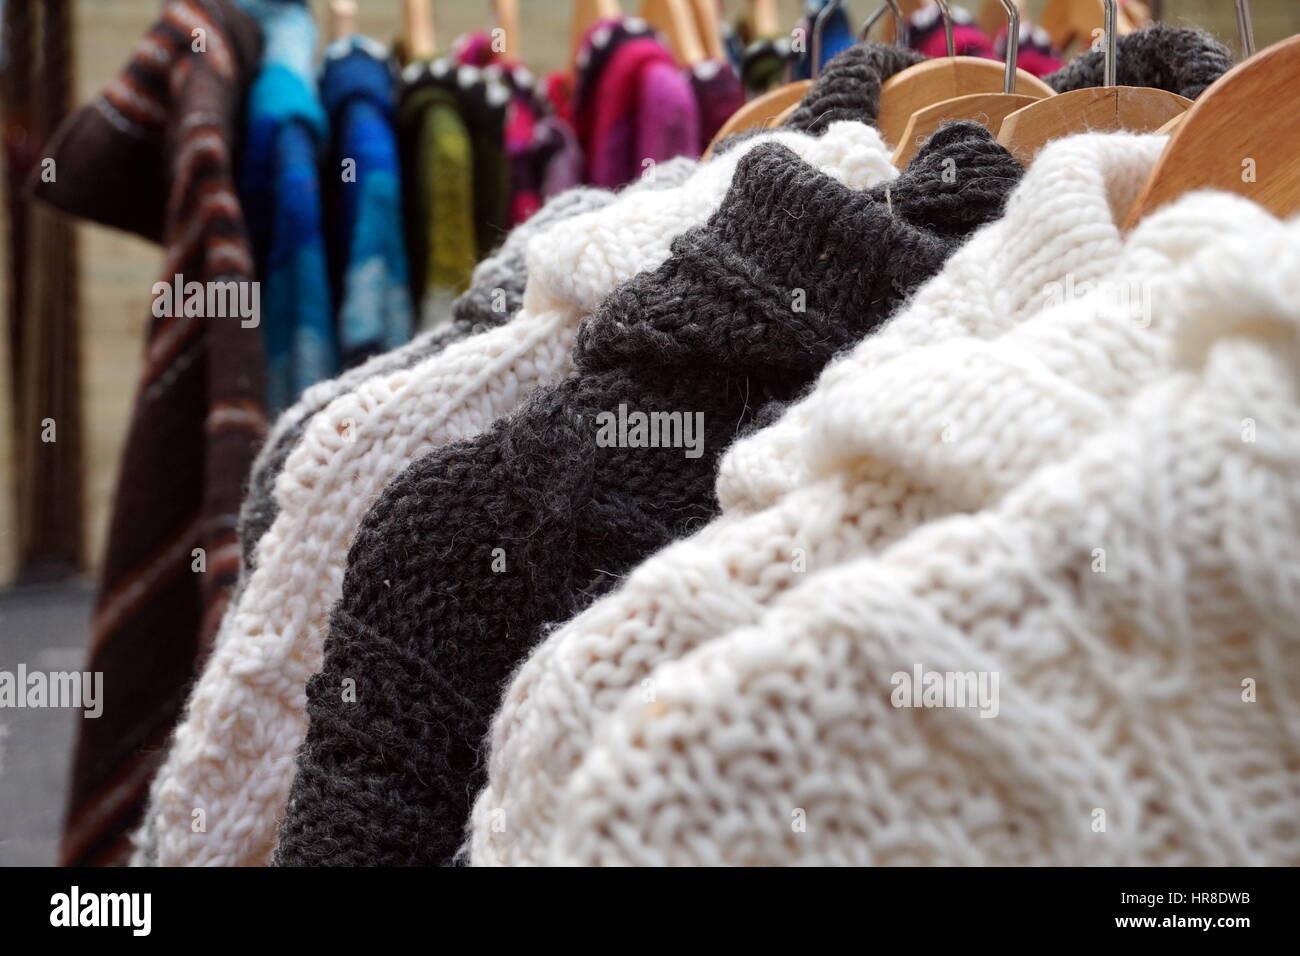 Black and white thick knitted wool winter jumpers and jackets for sale on a marlet stall Stock Photo